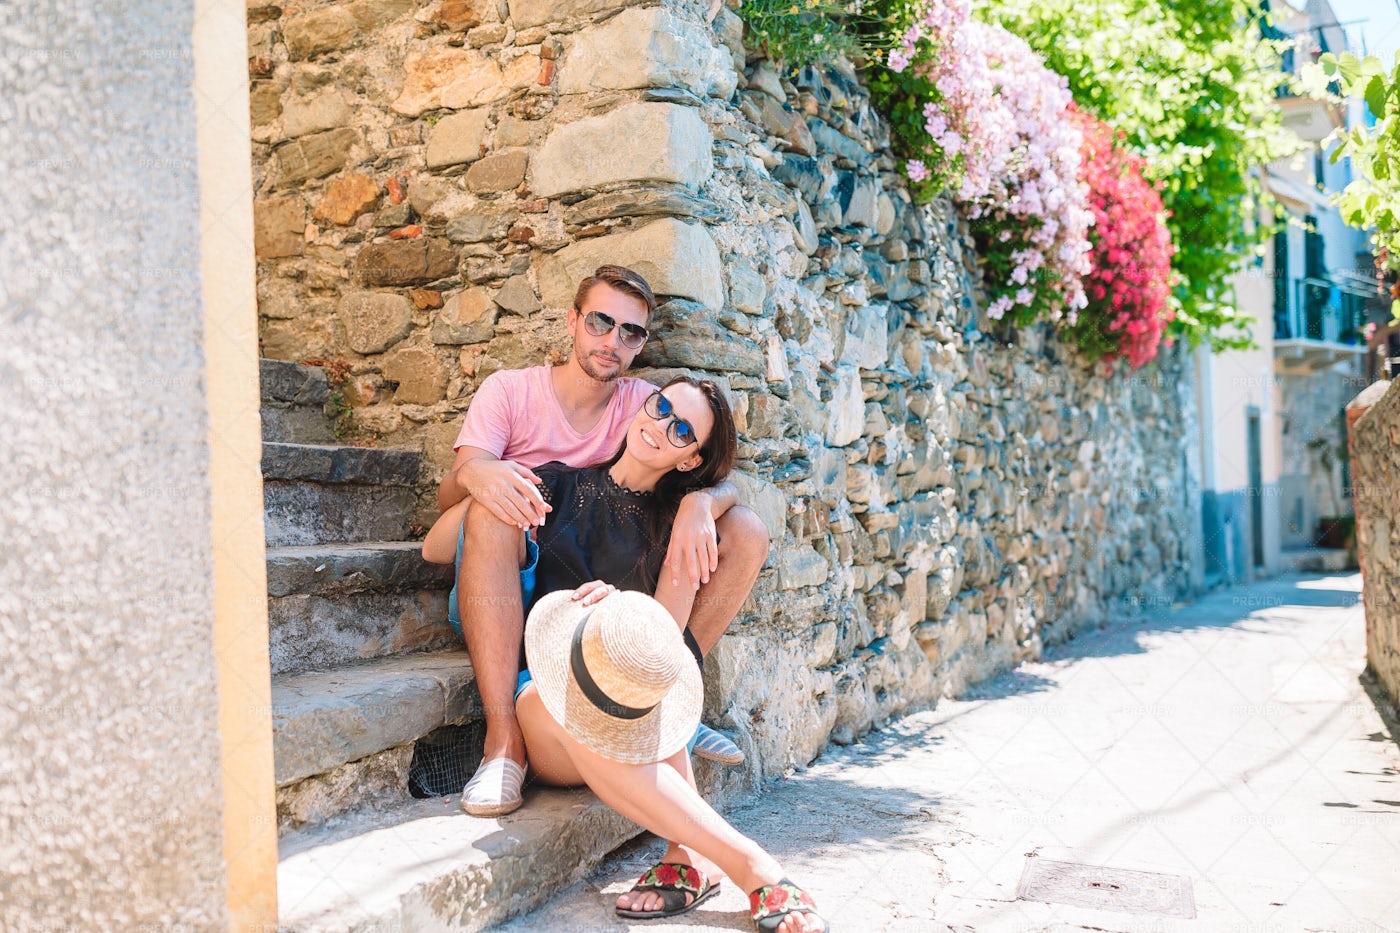 Couple Sitting On A Picturesque Street: Stock Photos